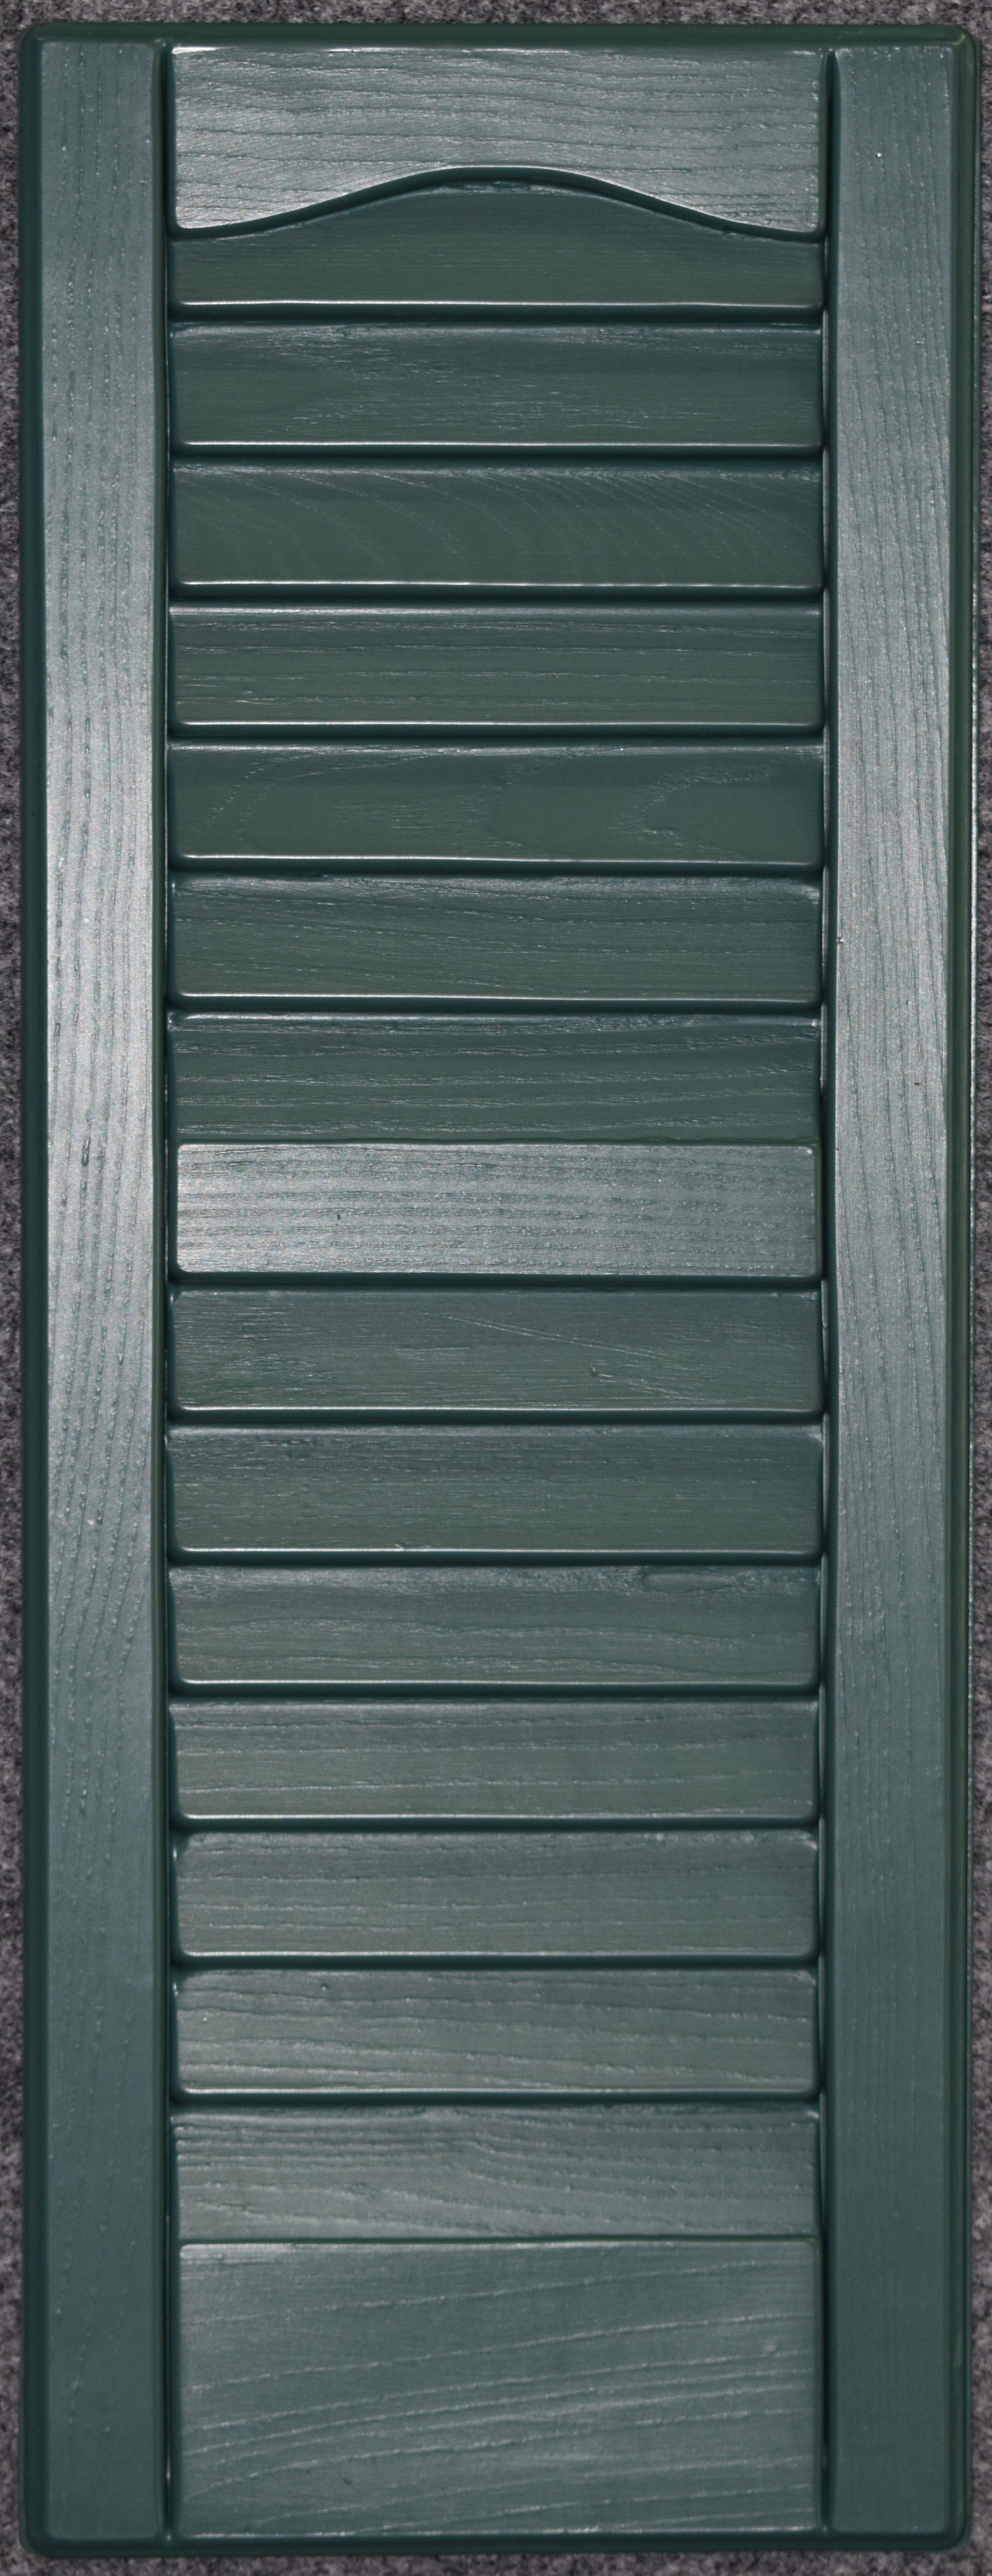 L0953gn-fh 9 X 53 In. Louvered Exterior Decorative Shutters, Hunter Green